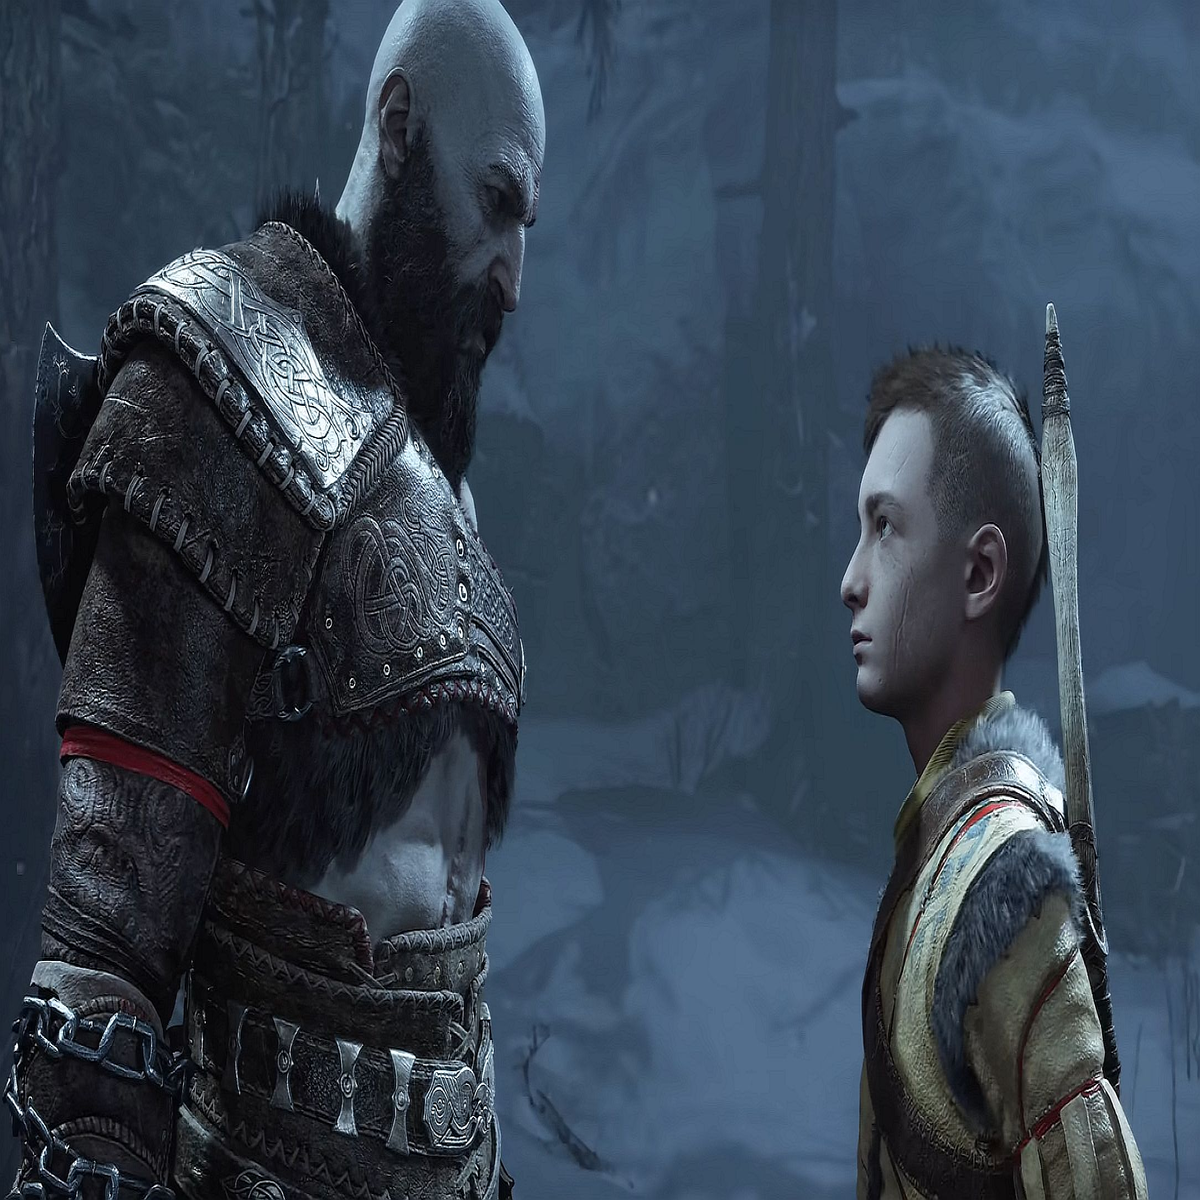 God of War: Ragnarök casts Odin as a mob boss in a deft blend of The Last  of Us and Skyrim